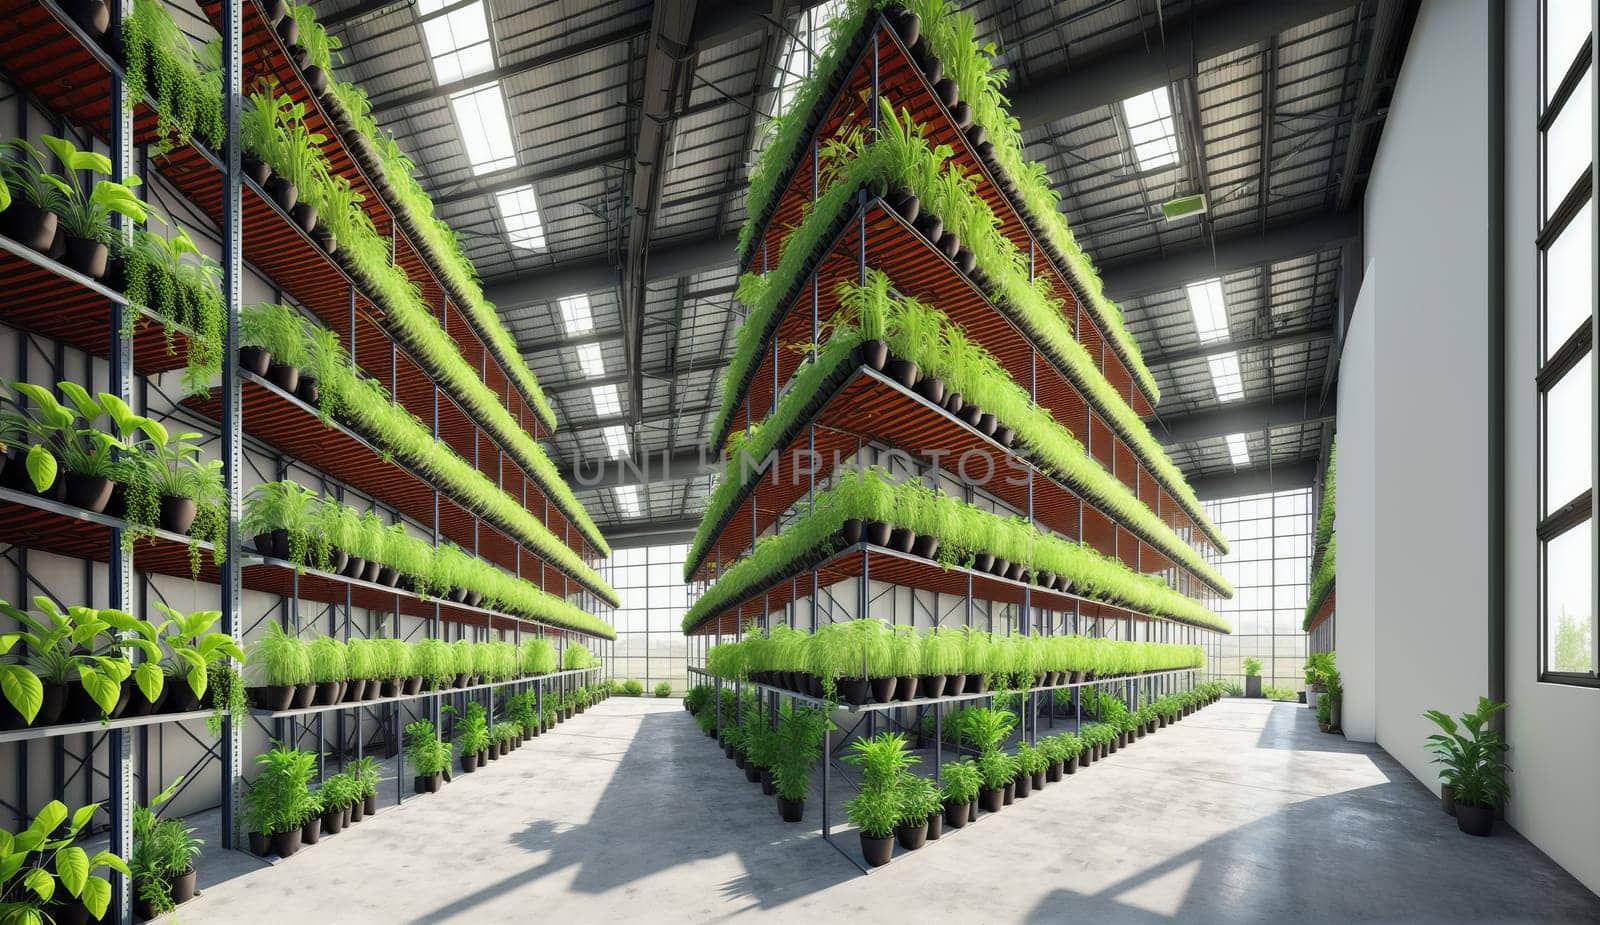 An urban design building facade with a symmetrical arrangement of terrestrial plants in glass shelves. The tints and shades create a vibrant rectangle and triangle pattern